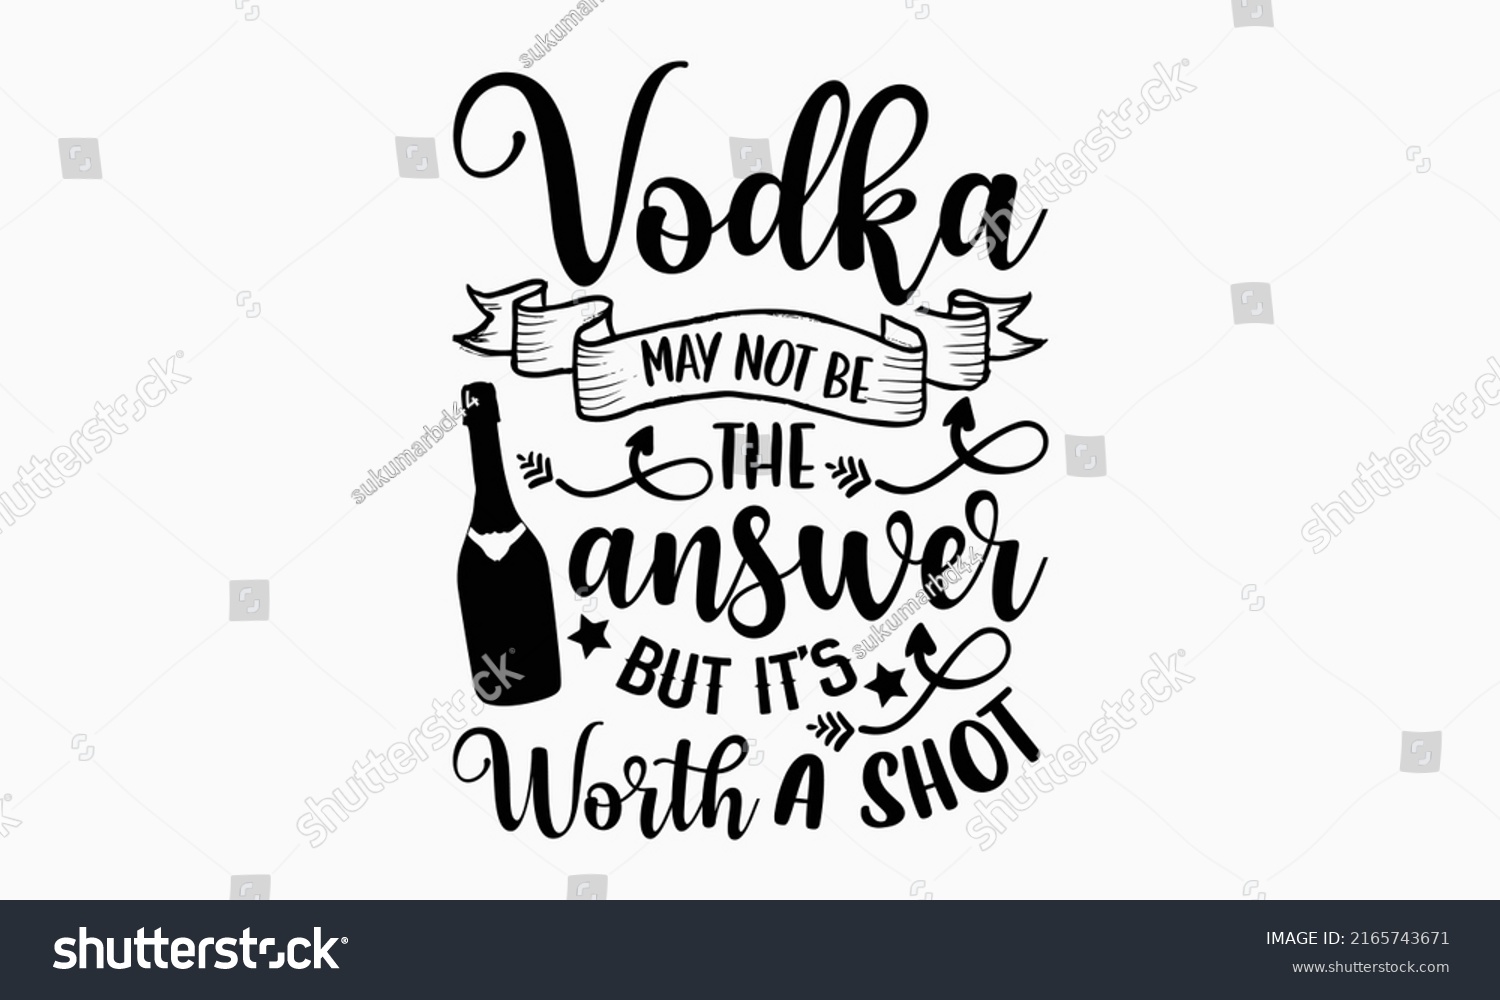 SVG of Vodka may not be the answer but it’s worth a shot - Alcohol t shirt design, Hand drawn lettering phrase, Calligraphy graphic design, SVG Files for Cutting Cricut and Silhouette svg